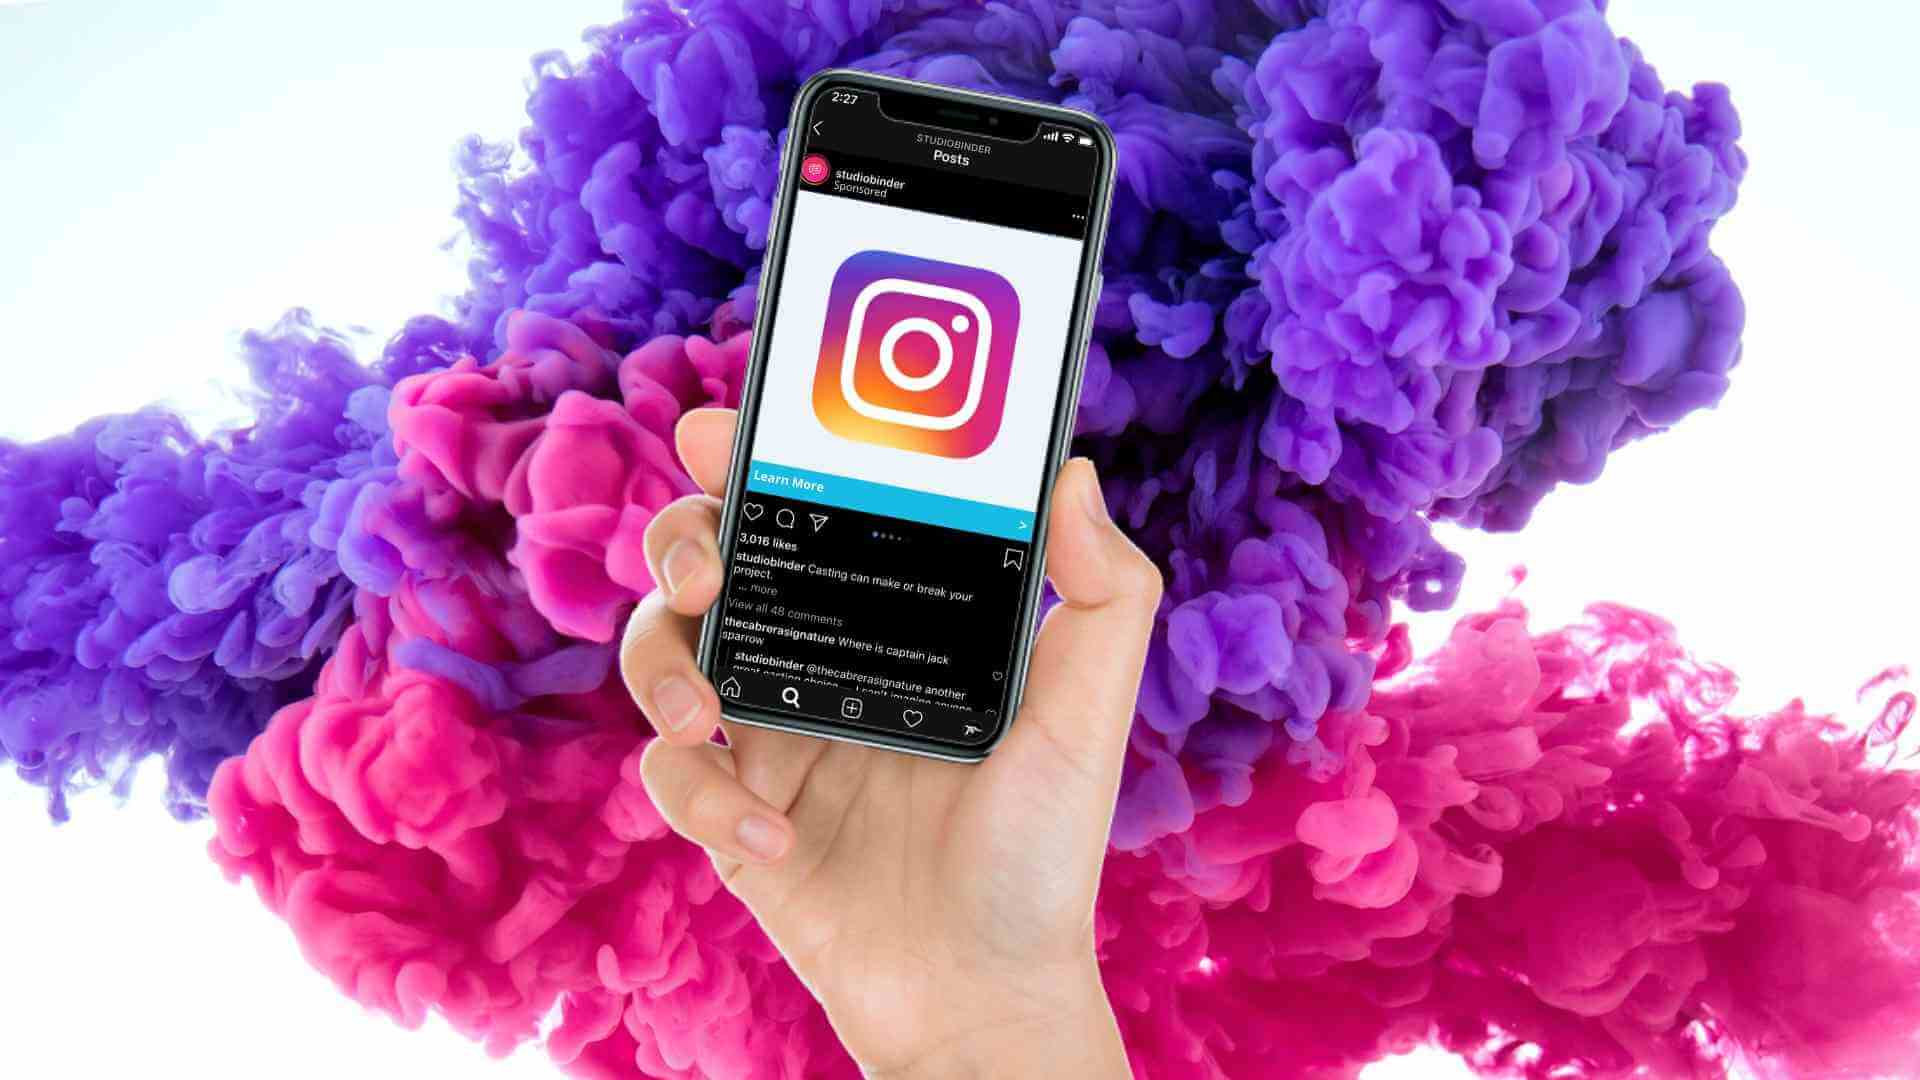 How to get more followers on instagram?